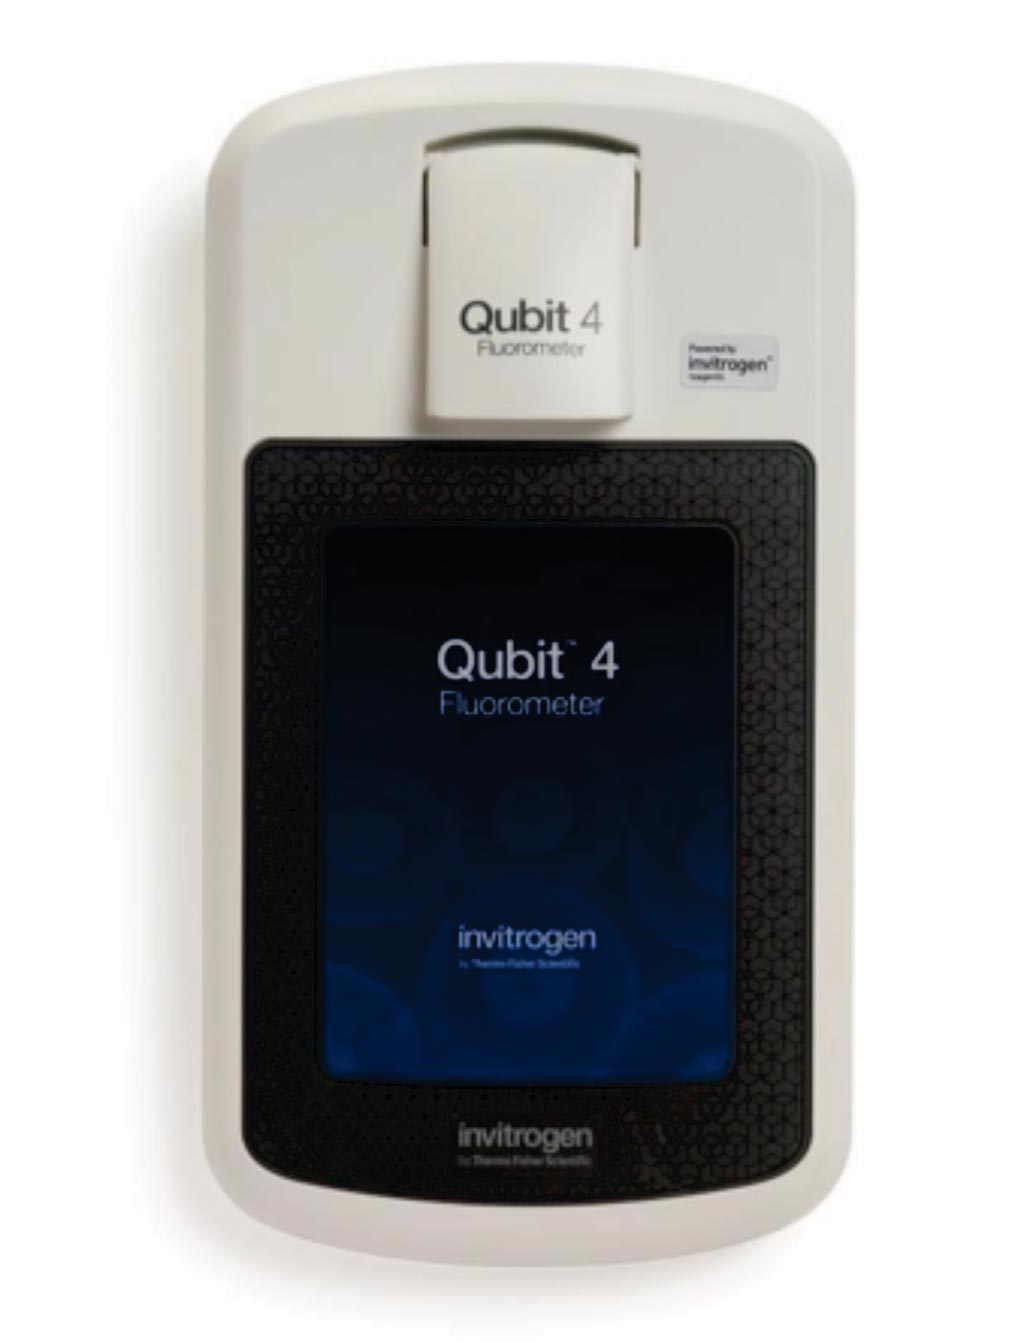 Image: The Invitrogen Qubit 4 Fluorometer is the next generation of the popular benchtop fluorometer designed to accurately measure DNA, RNA, and protein quantity (Photo courtesy of Thermo Fisher Scientific).